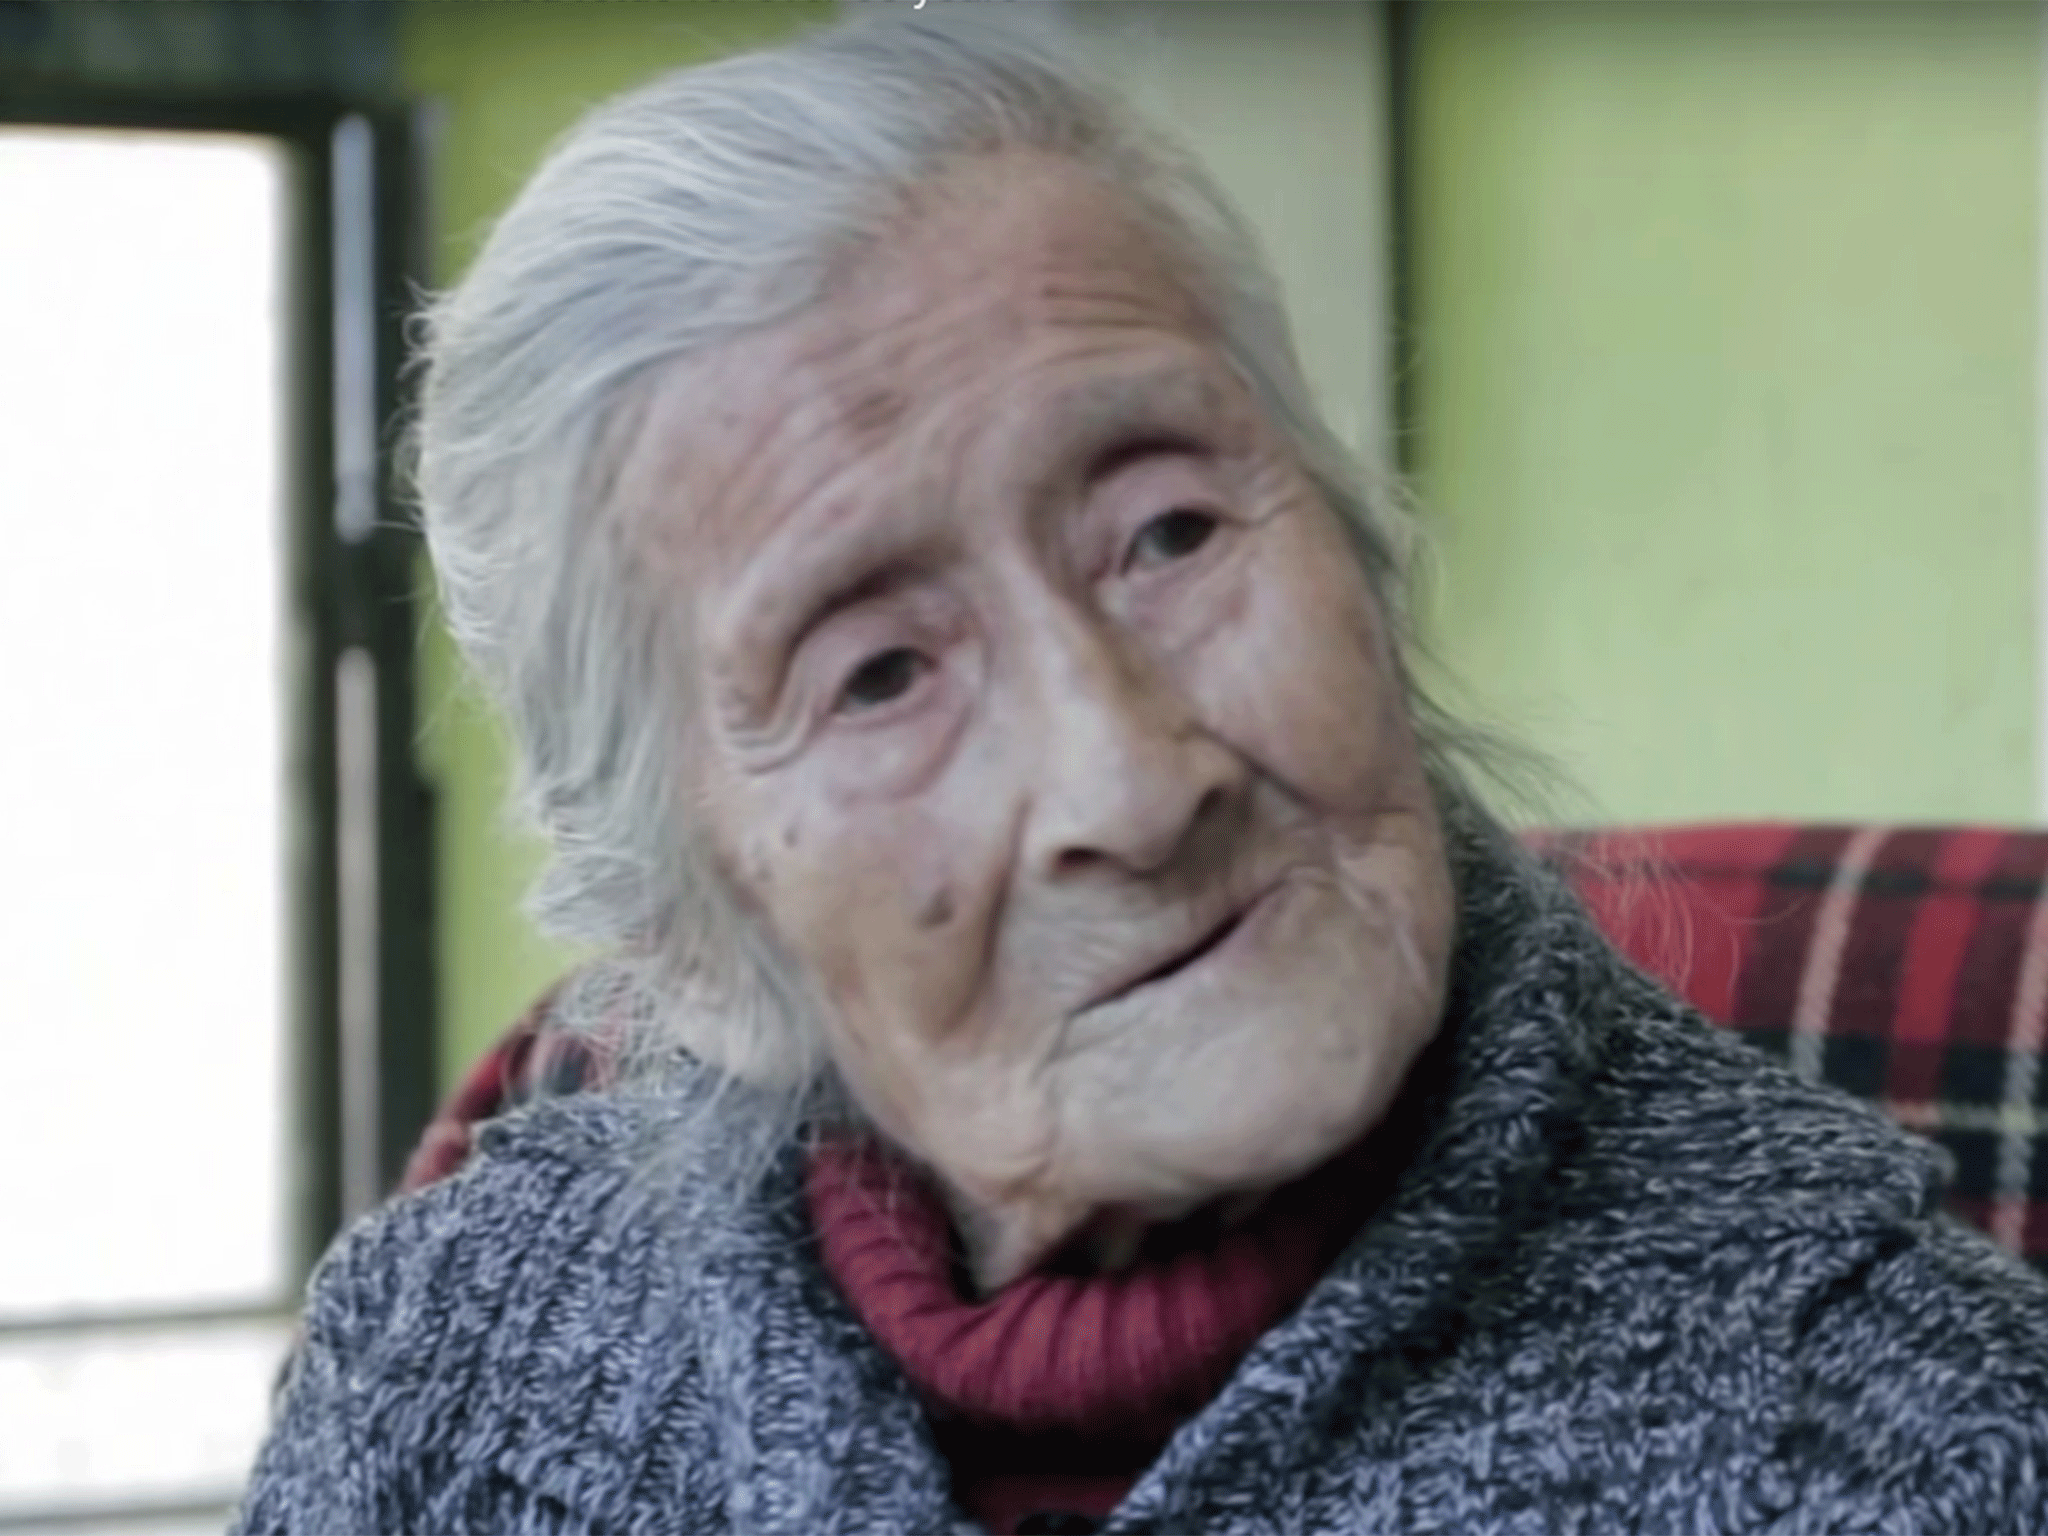 Chilean woman, 91, told she has been 'carrying foetus in her womb